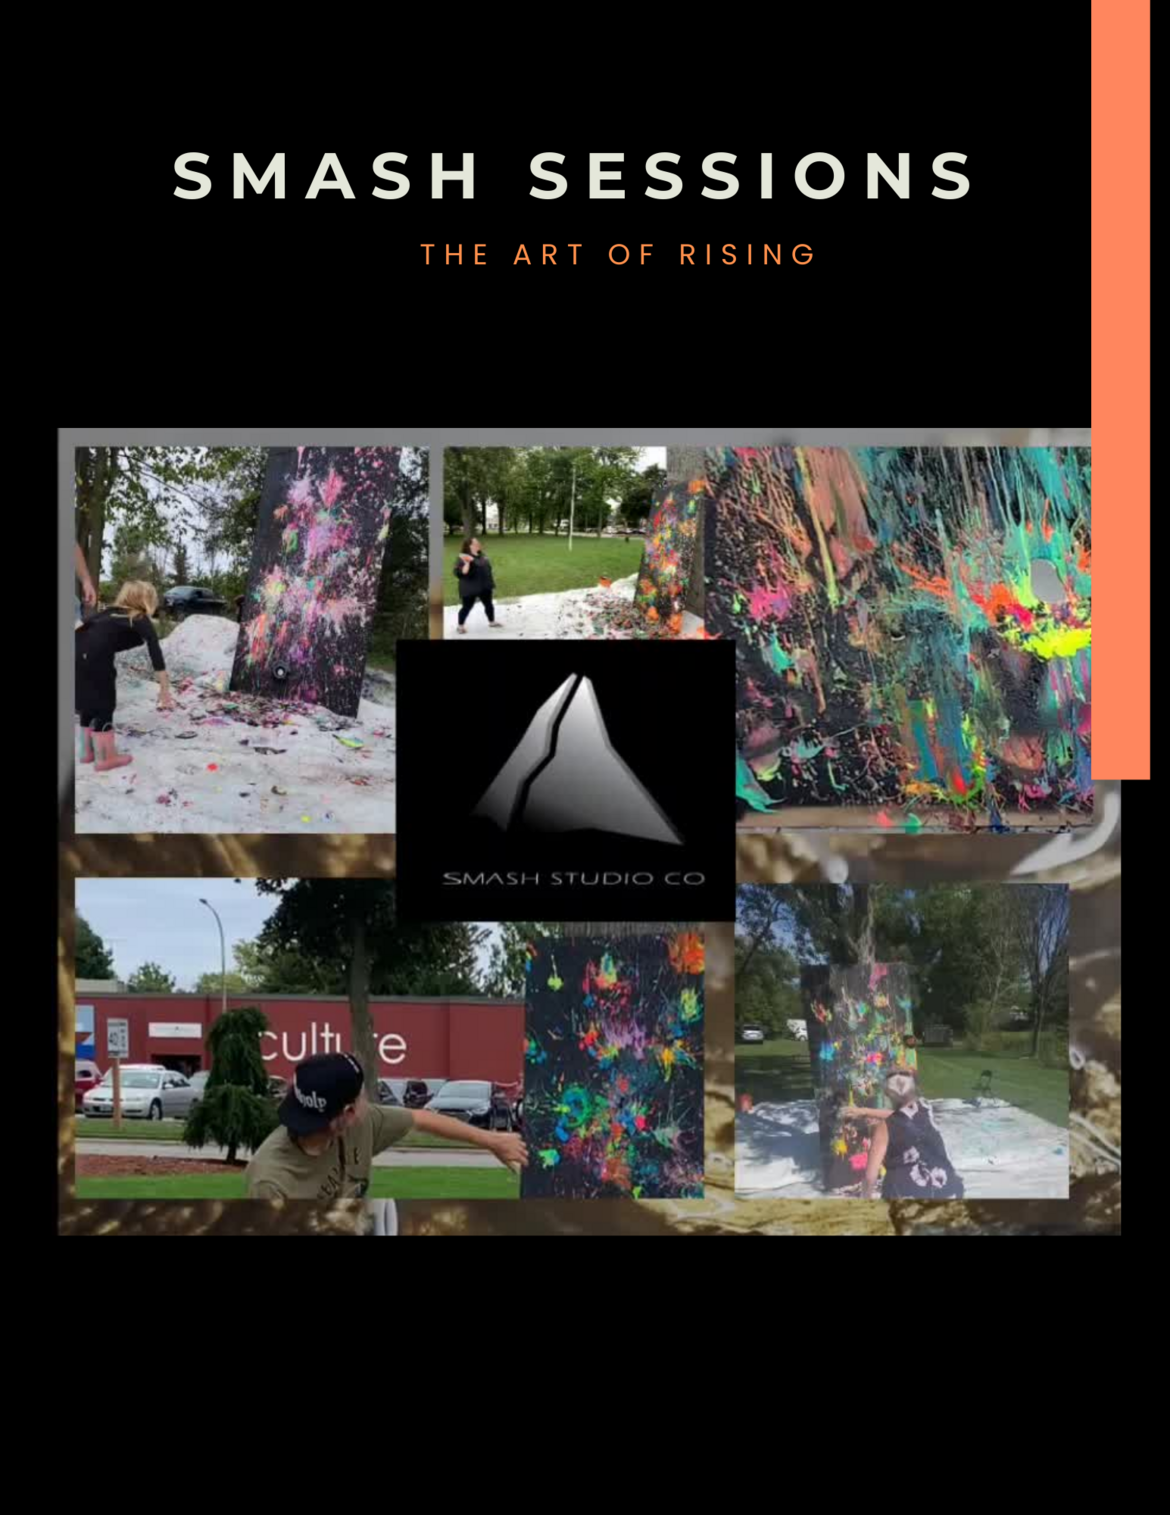 The art of rising - community artists - smashing awareness for suicide prevention and to harvest materials for debut Crow project.